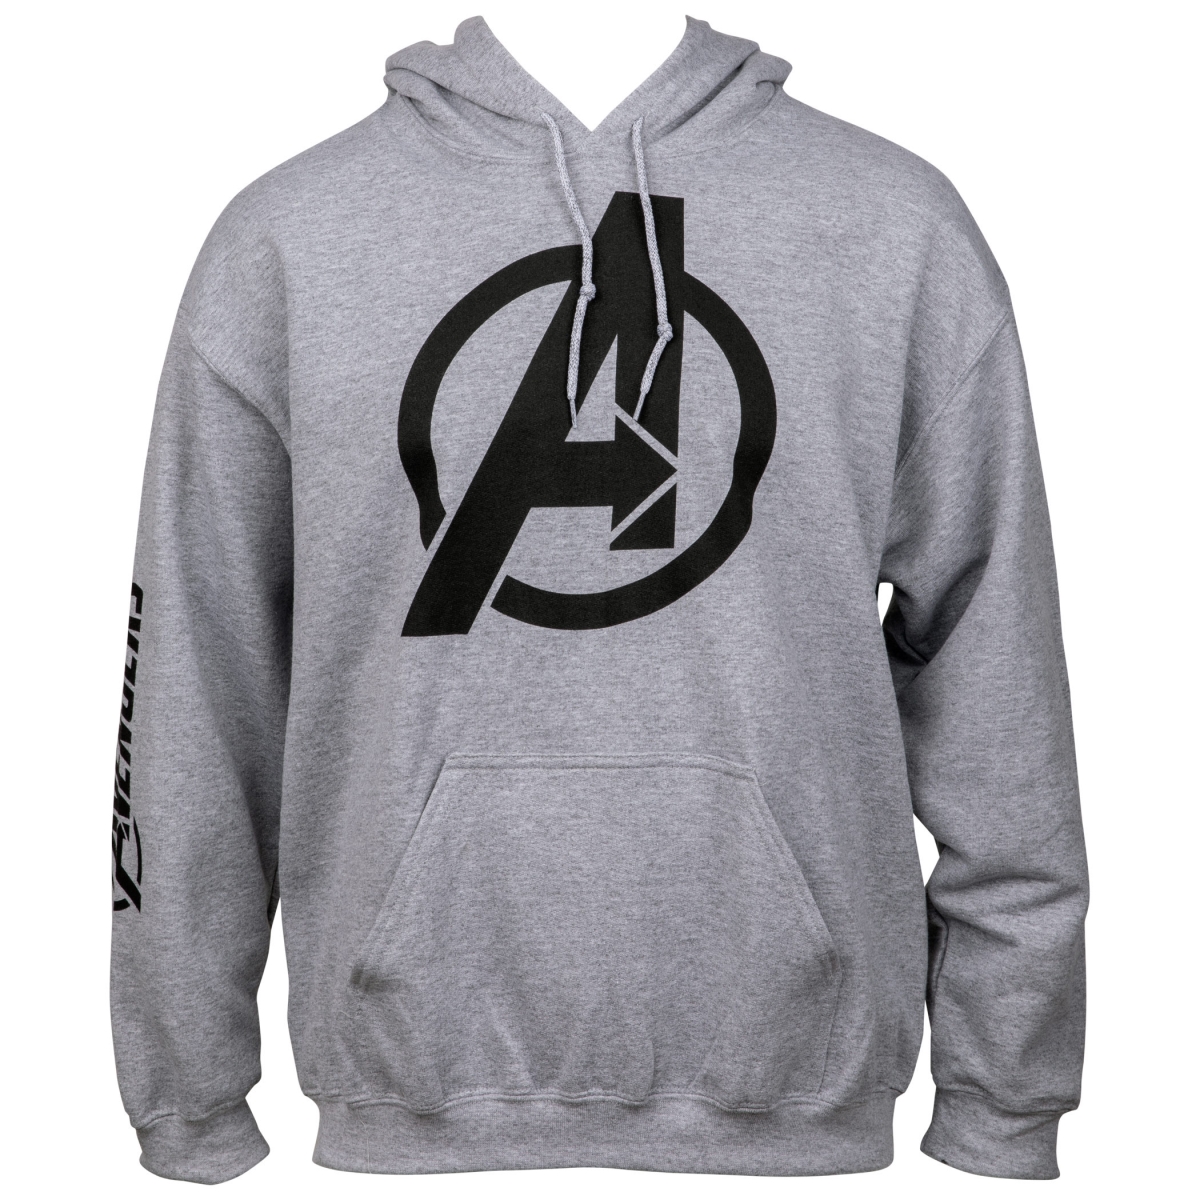 Picture of Avengers 812930-xlarge Avengers Symbol with Sleeve Print Text Pull Over Hoodie, Extra Large